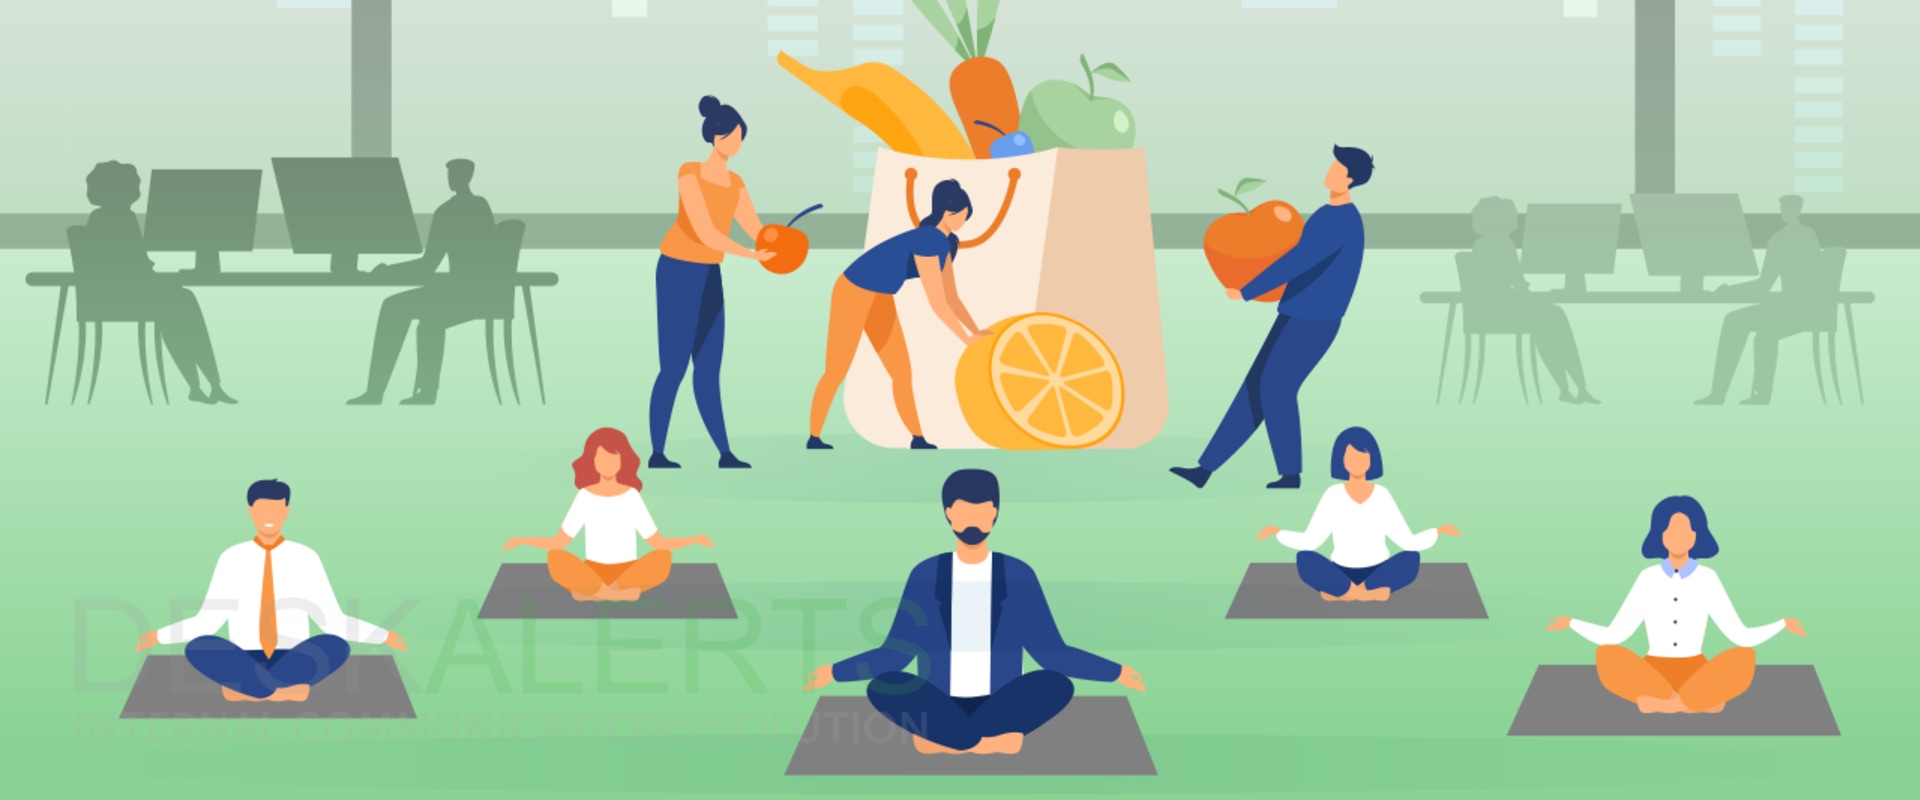 Reduced Risk of Chronic Diseases: Why Employee Wellbeing Initiatives are Essential for a Healthy Workplace